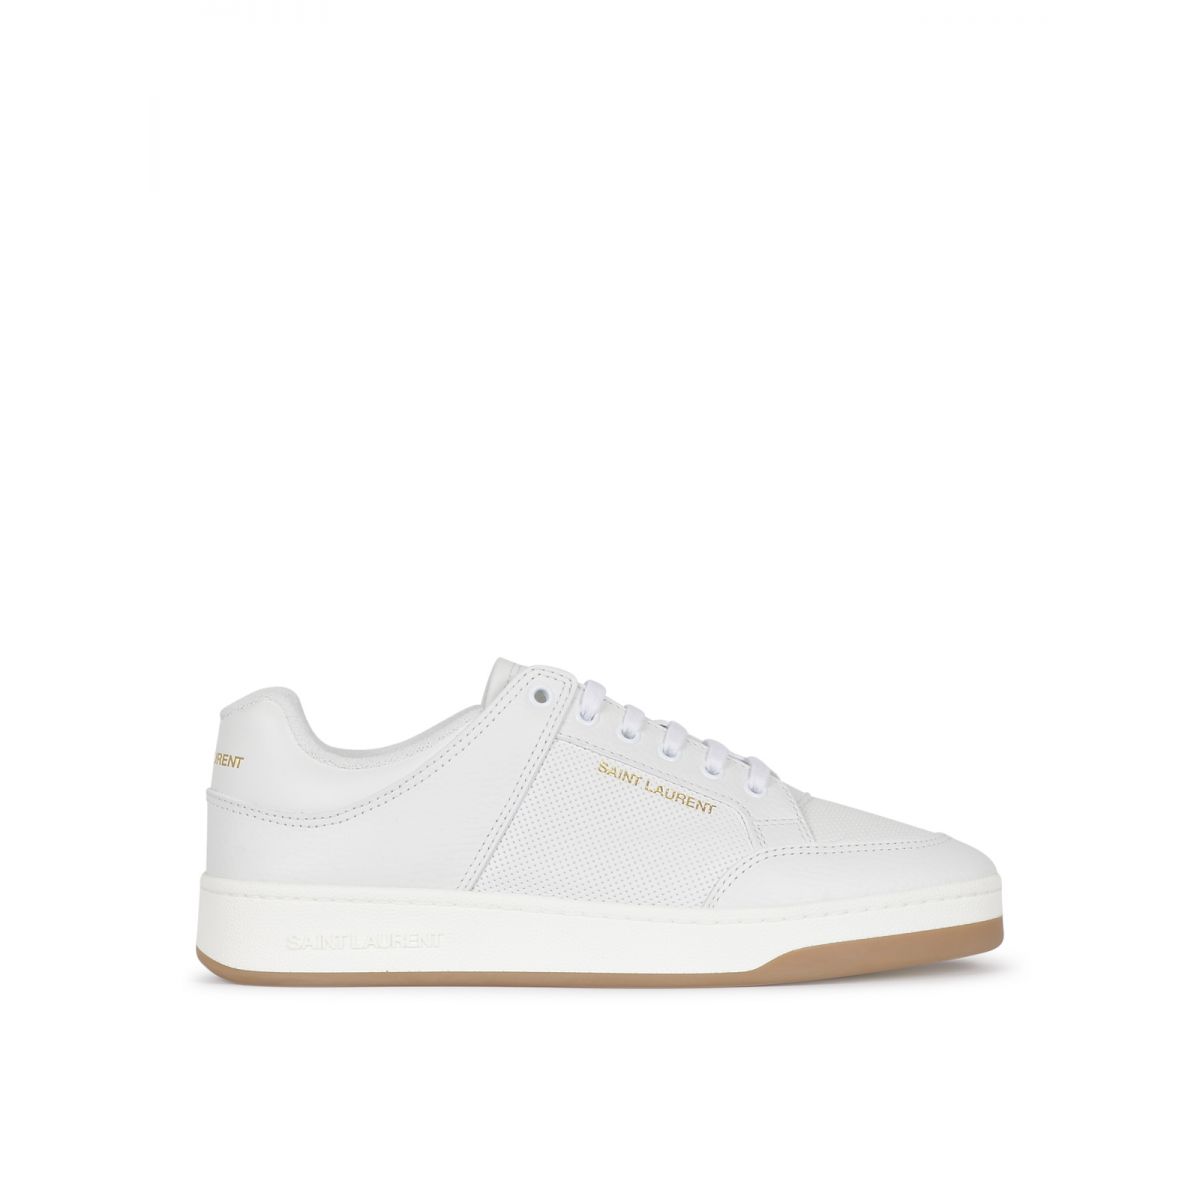 SAINT LAURENT - SL/61 low sneakers in perforated leather